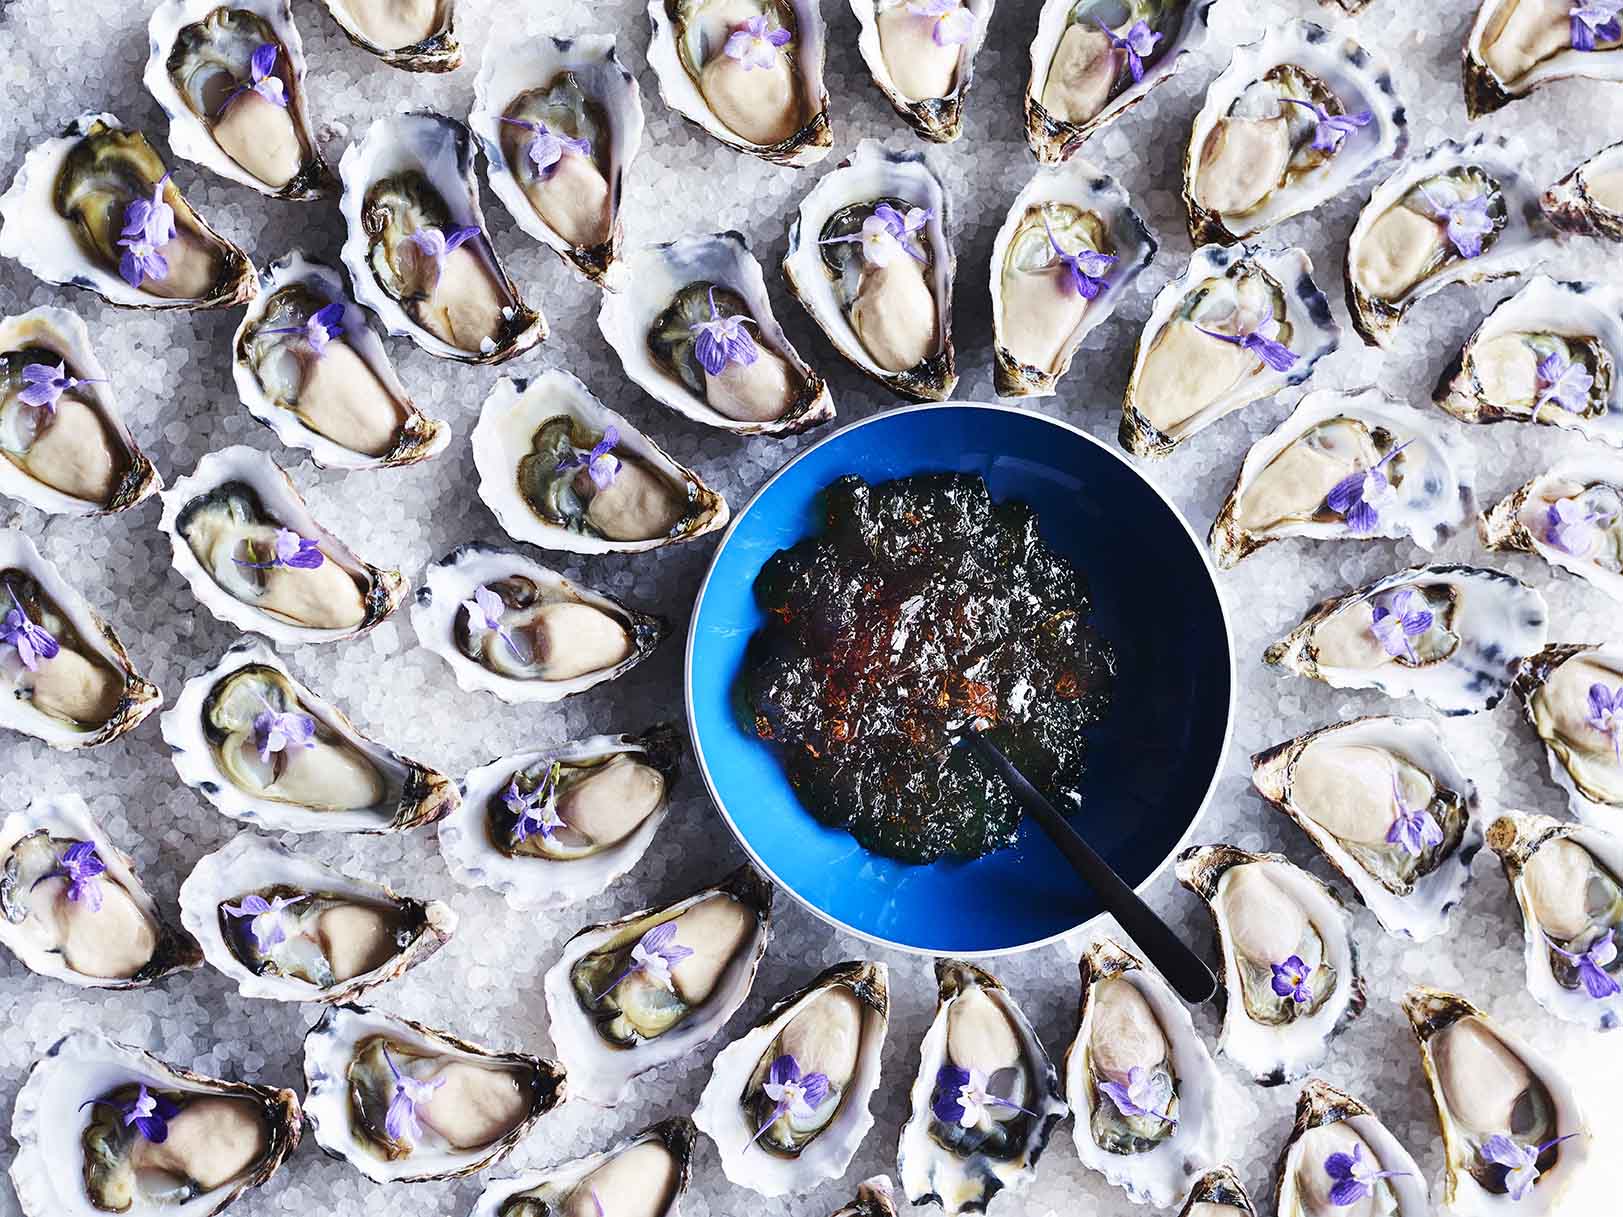 Wedding catering at its best: fresh Sydney oysters presented by Gastronomy for maximum impact